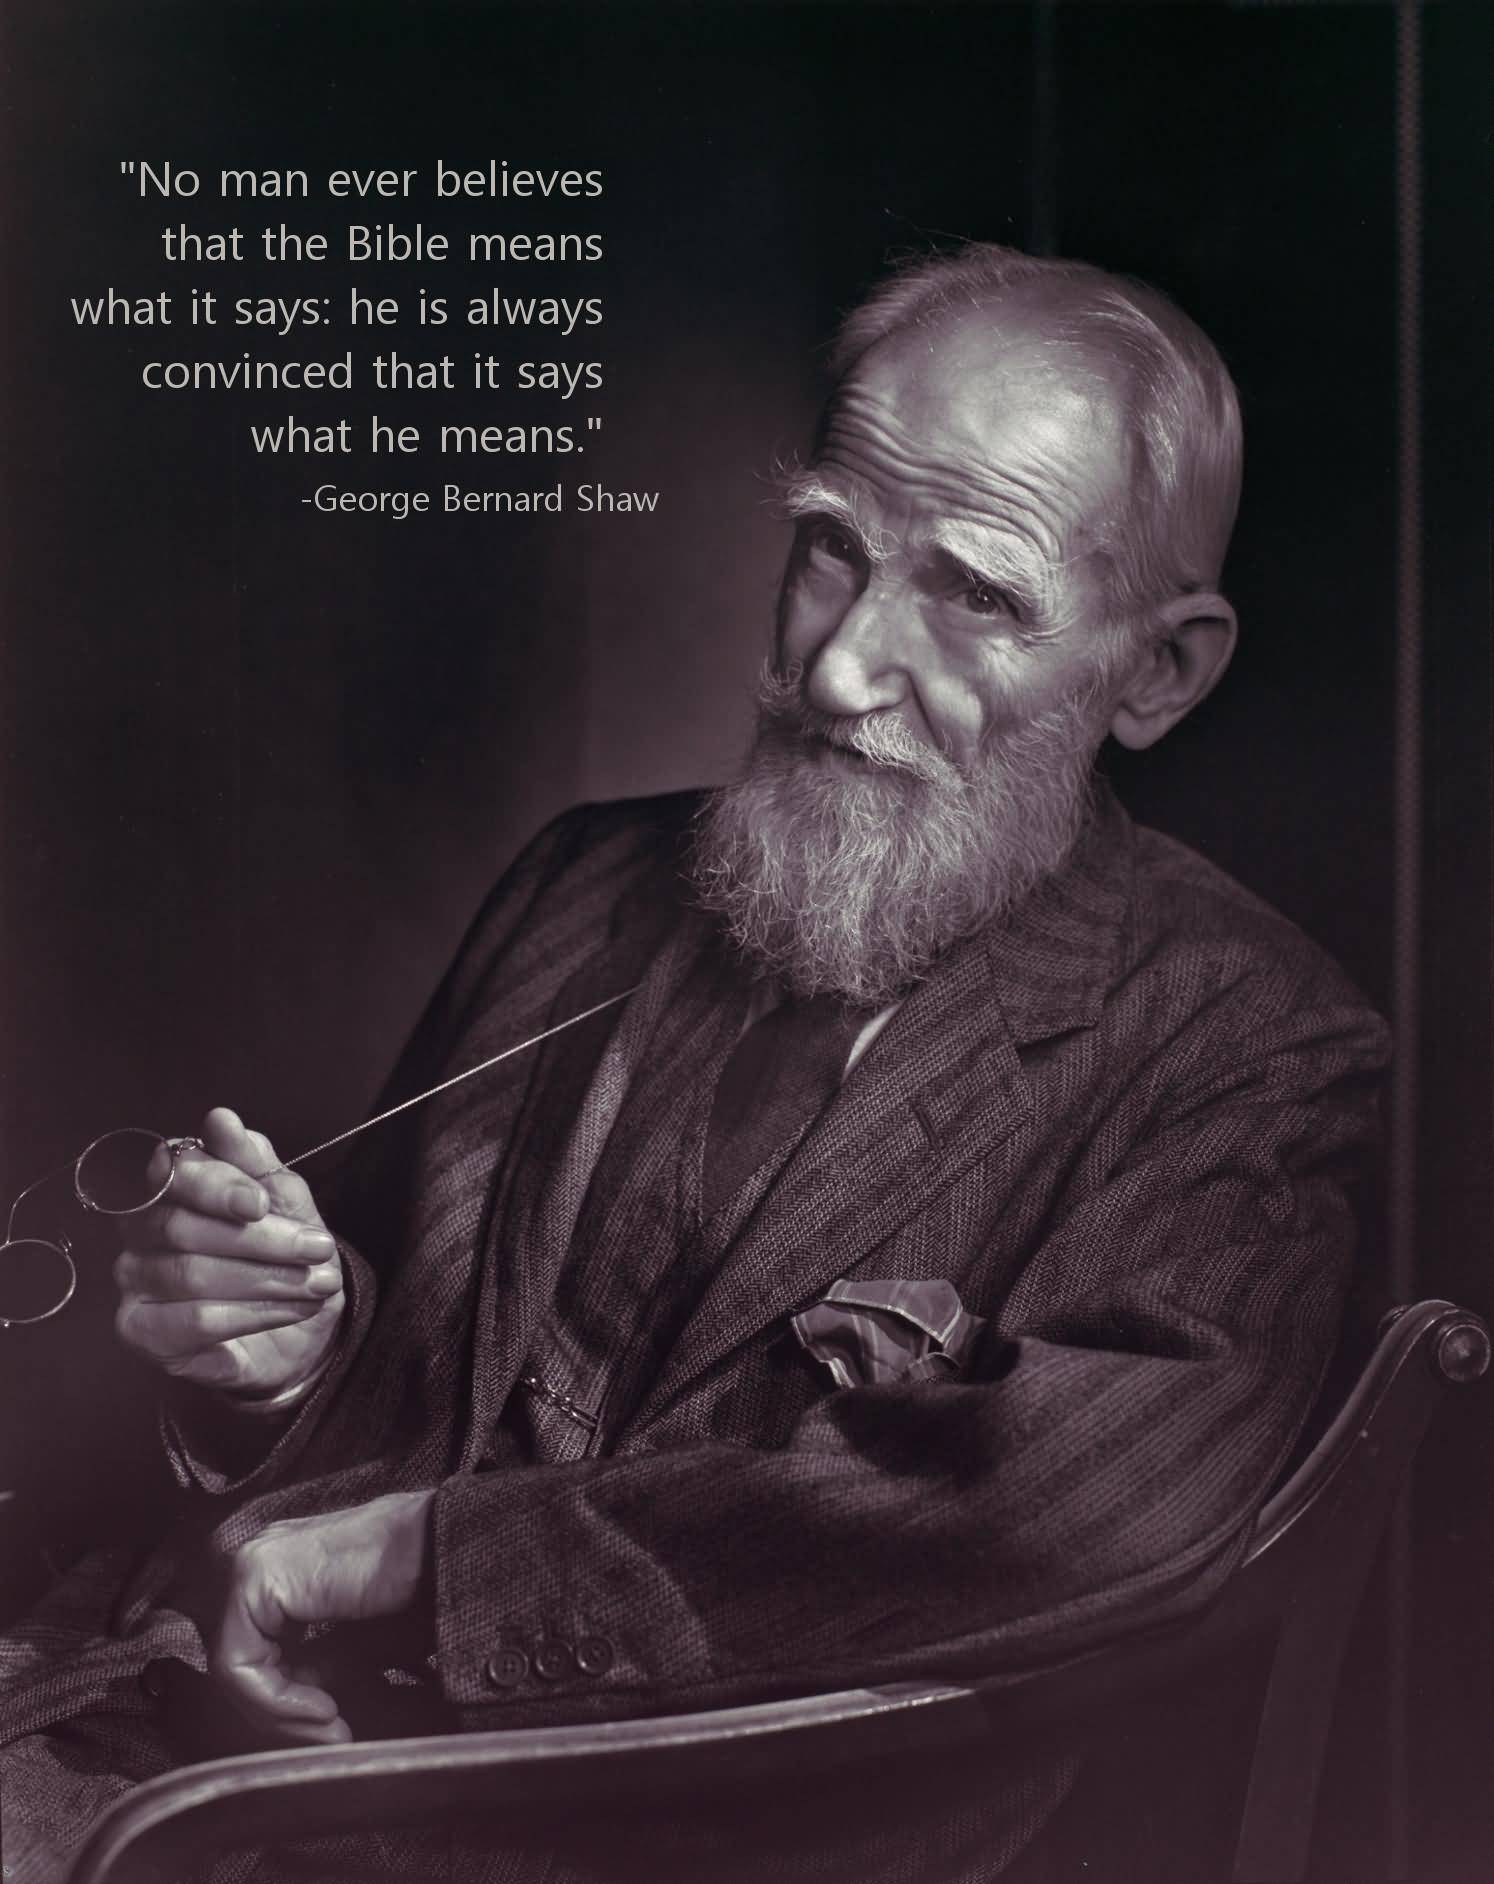 No man ever believes that the Bible means what it says . He is always convinced that it says what he means - George Bernard Shaw